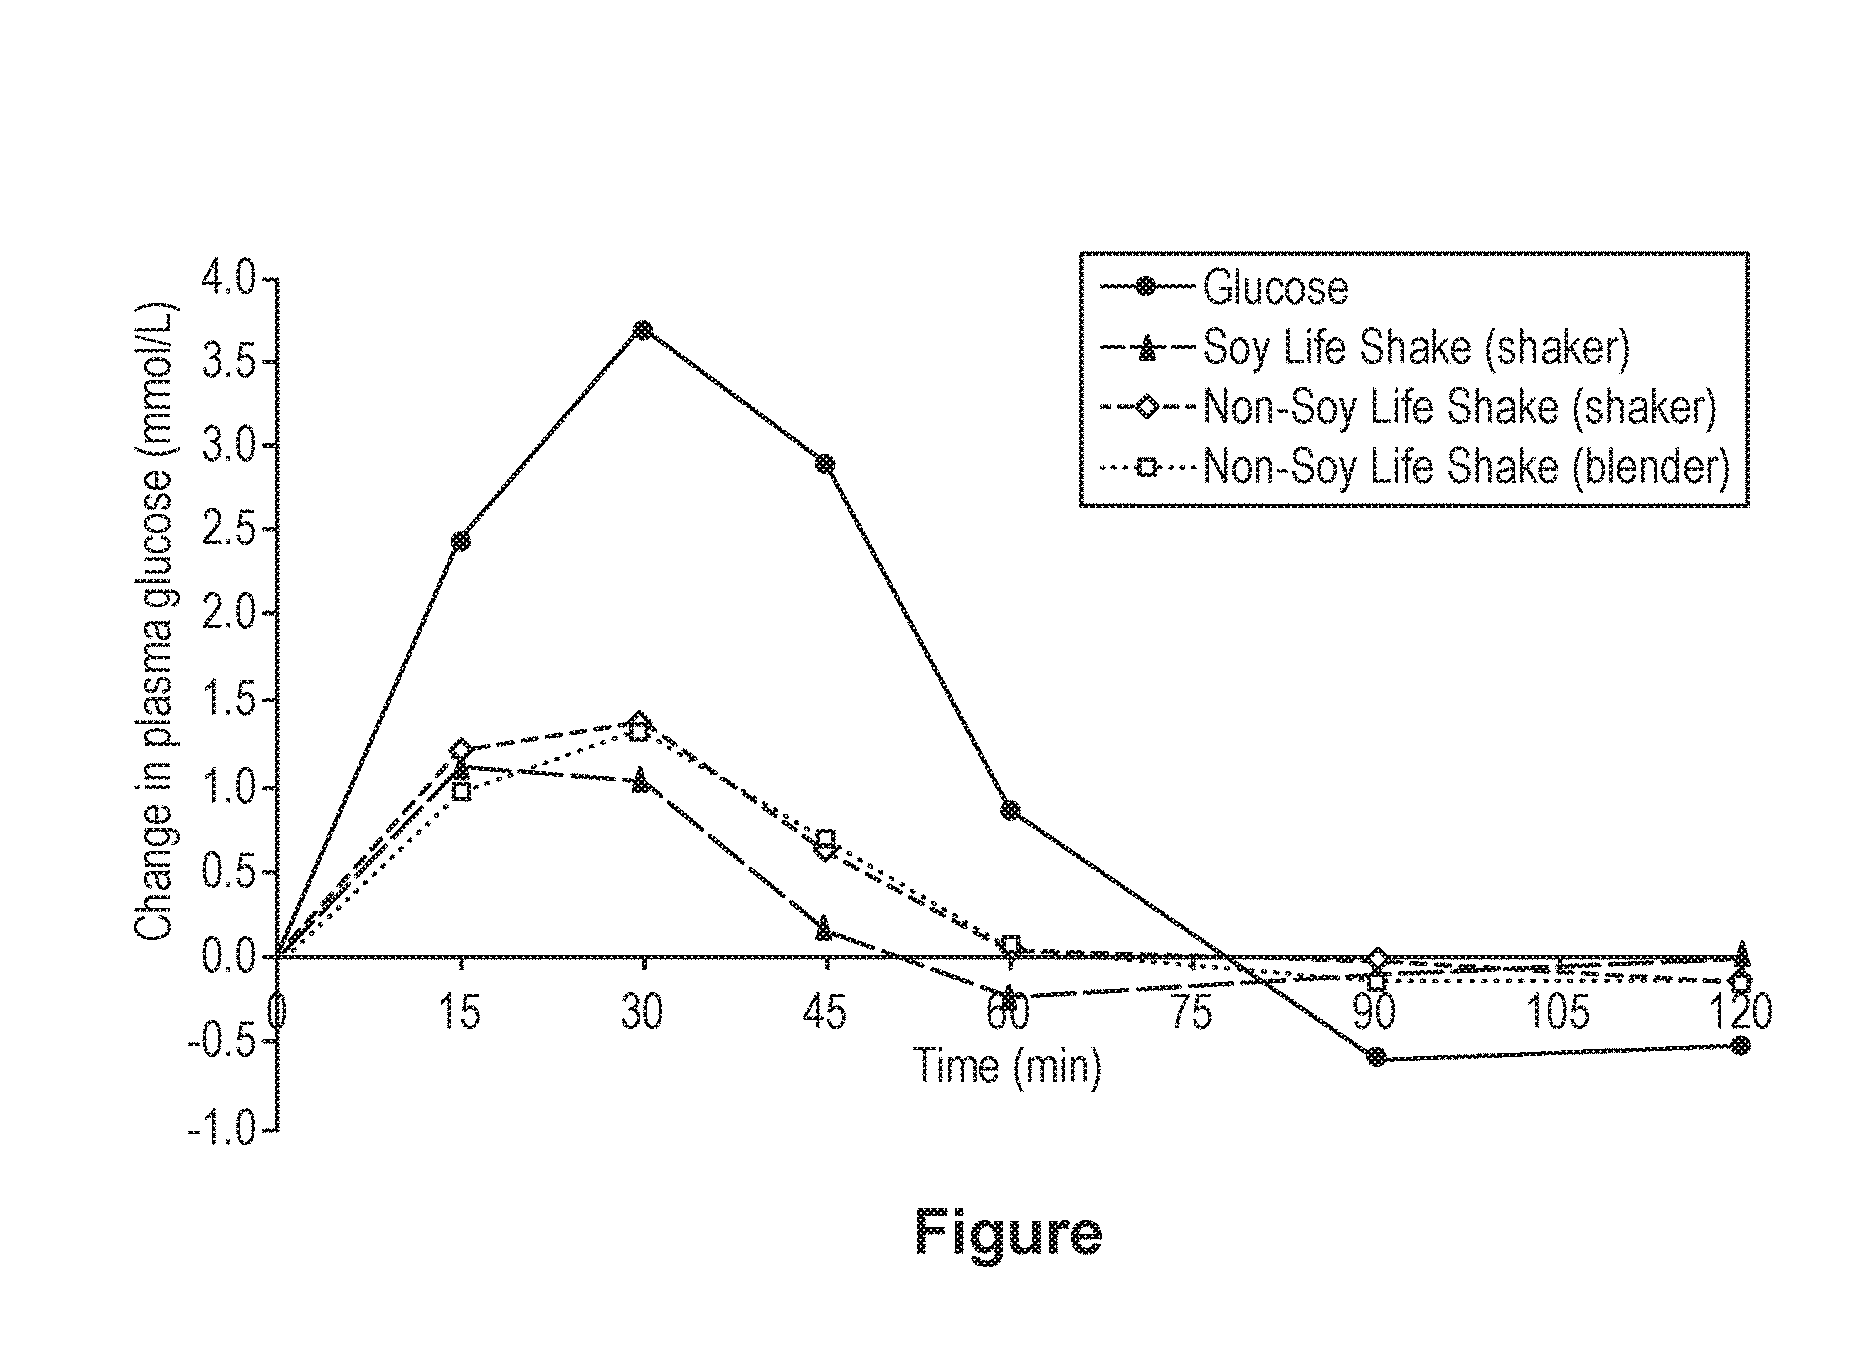 Materials and methods for improving gastrointestinal health